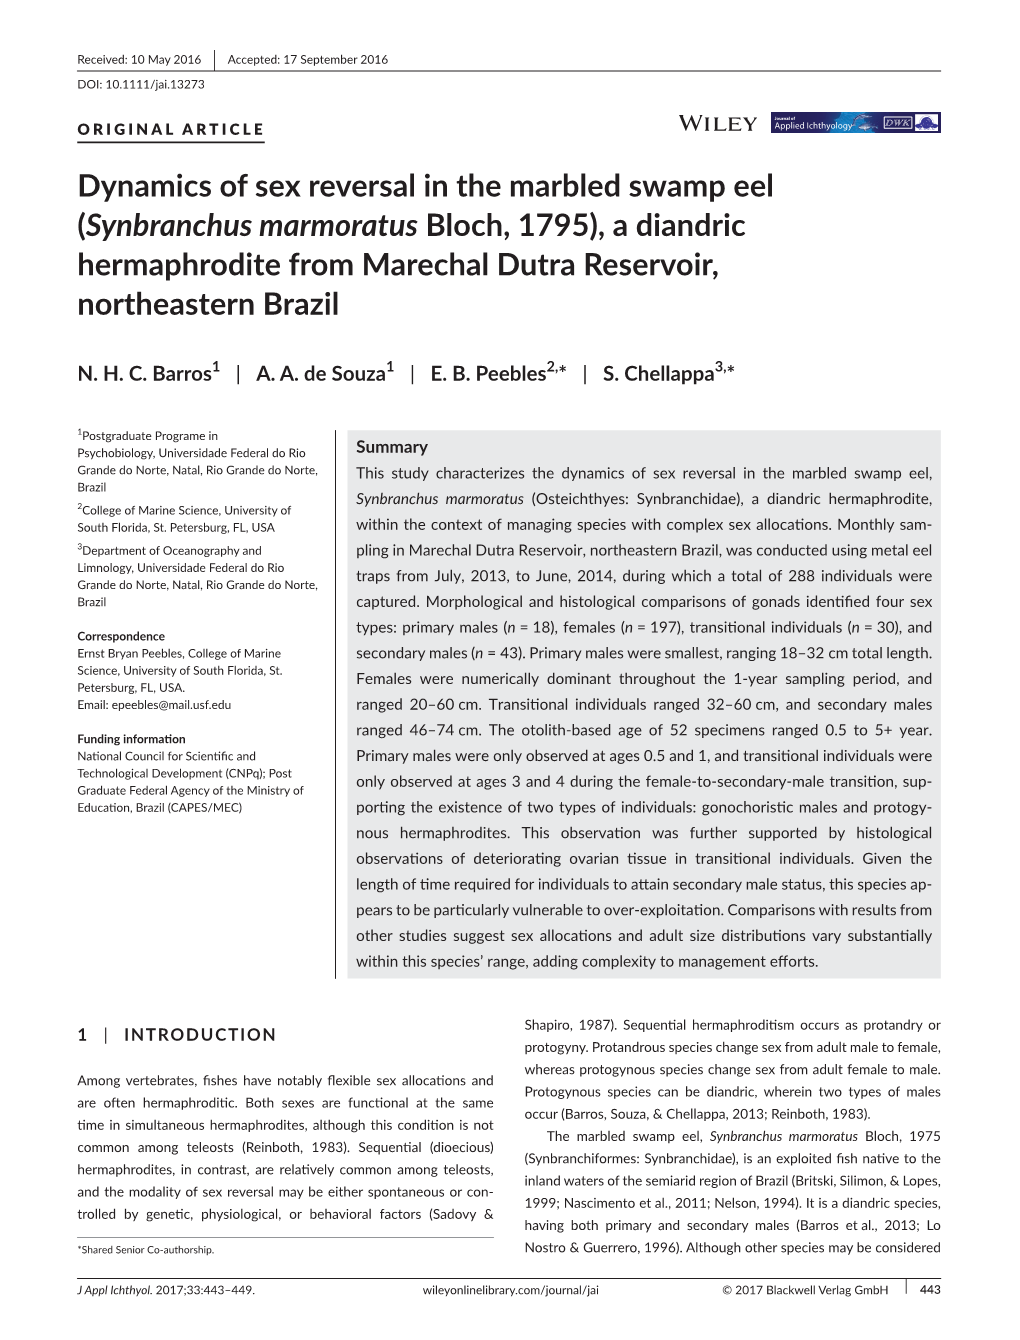 Dynamics of Sex Reversal in the Marbled Swamp Eel (Synbranchus Marmoratus Bloch, 1795), a Diandric Hermaphrodite from Marechal Dutra Reservoir, Northeastern Brazil